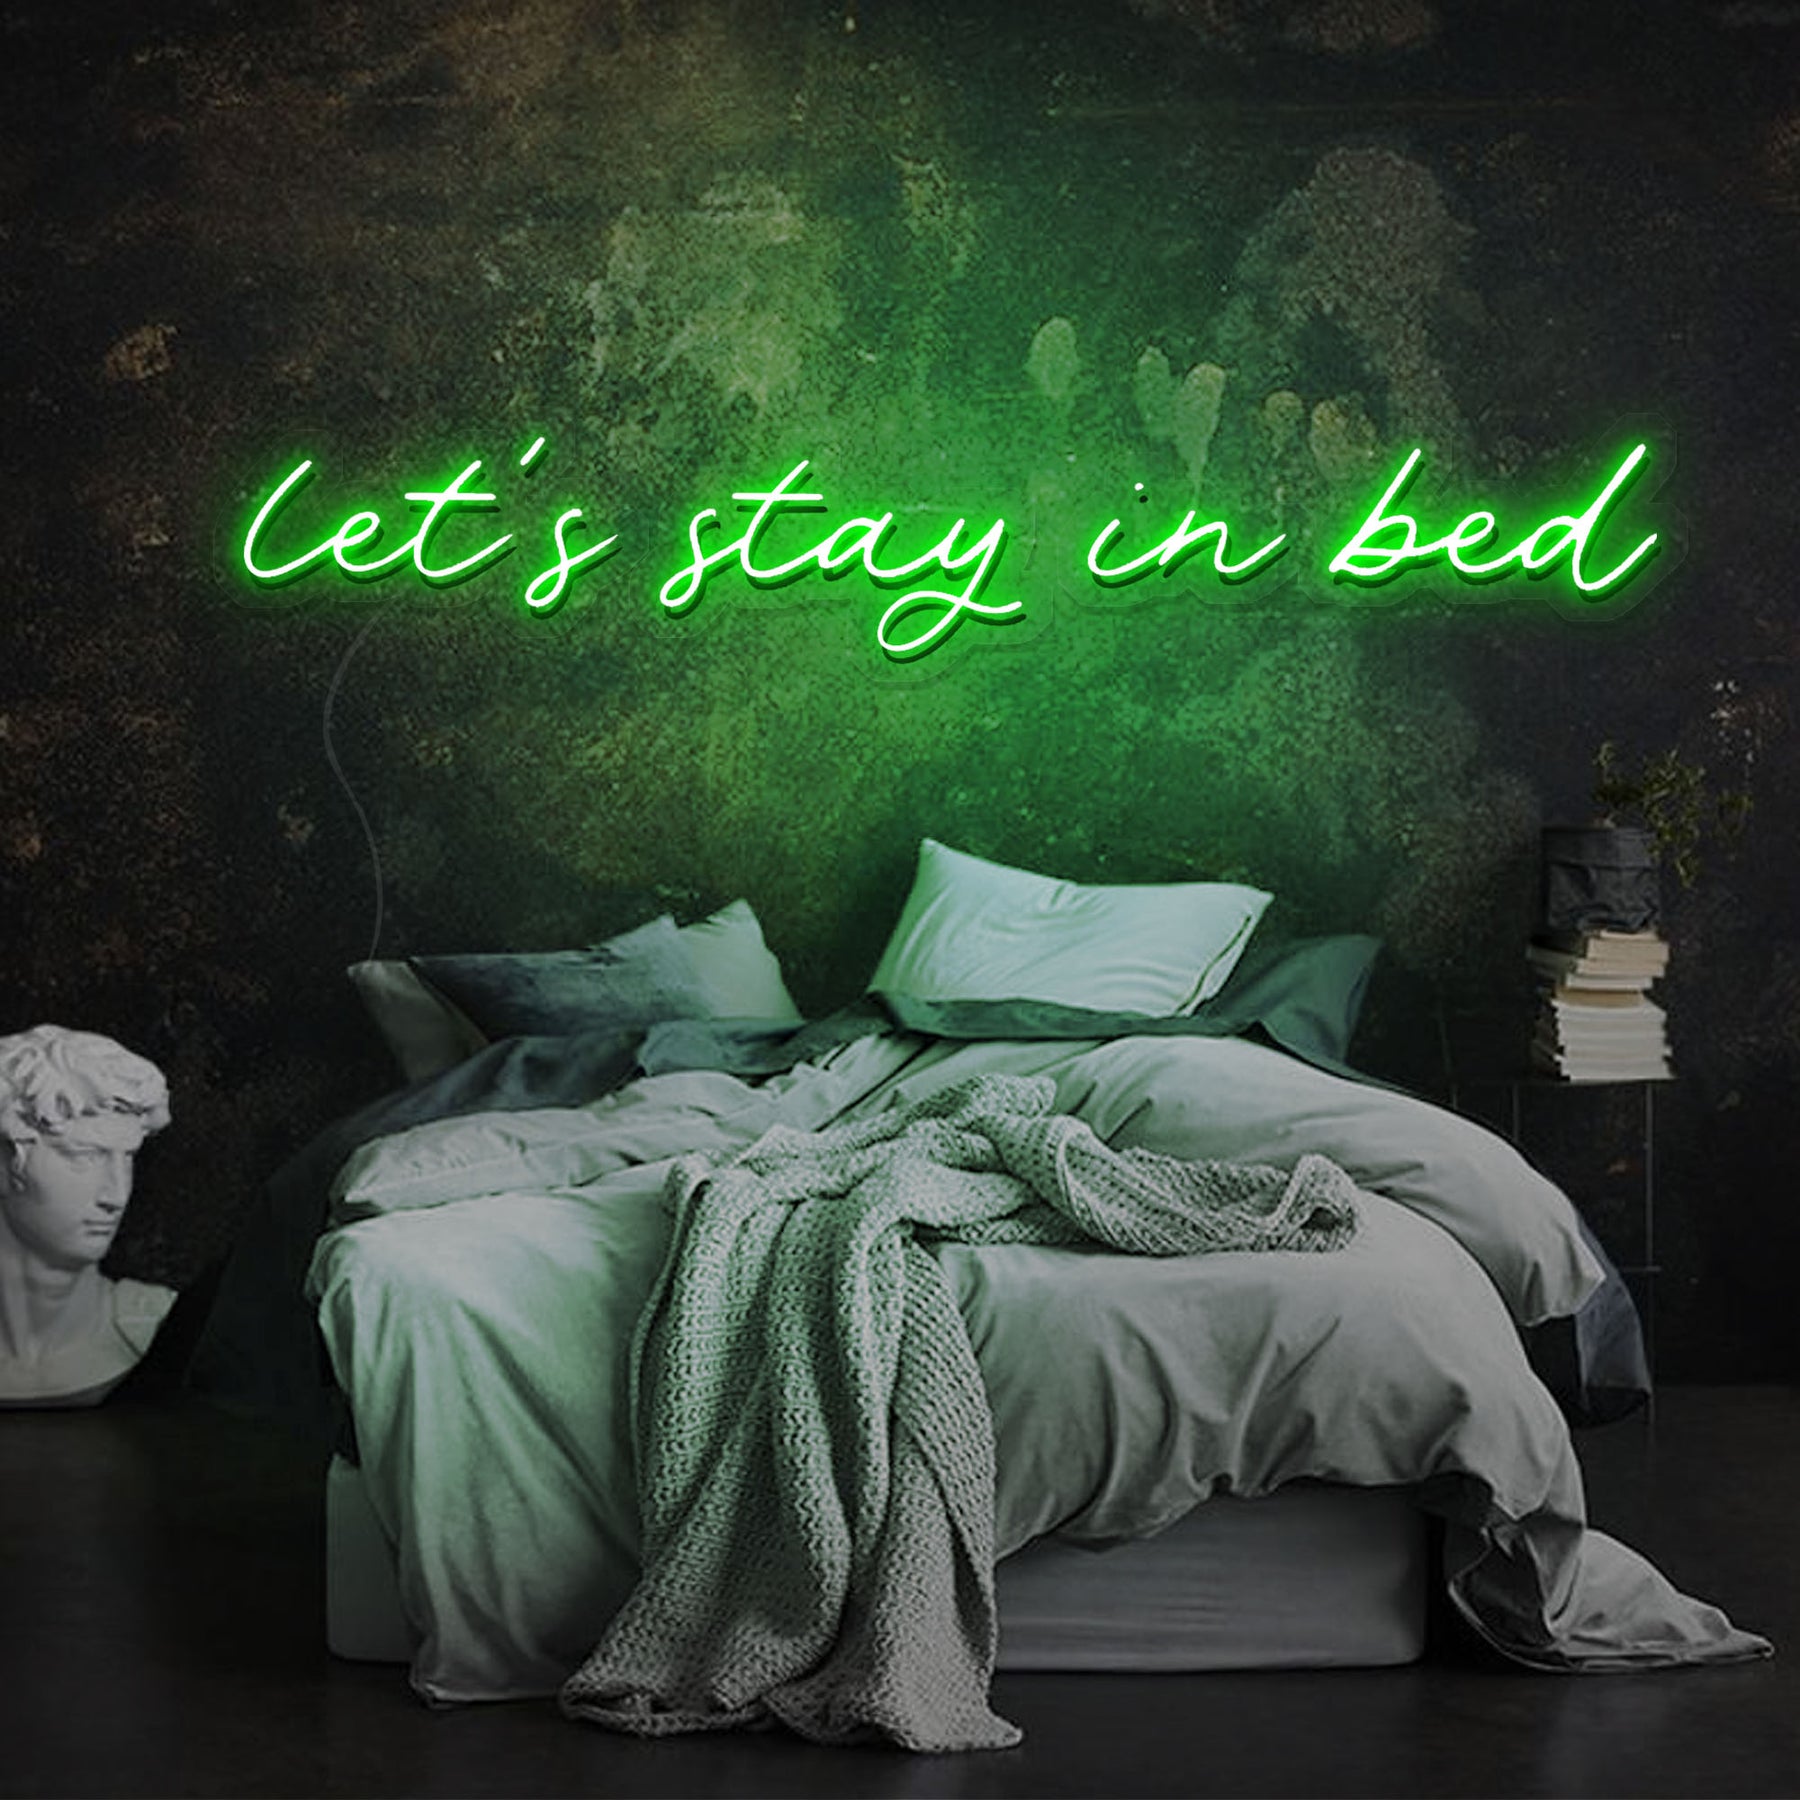 Let's Stay In Bed